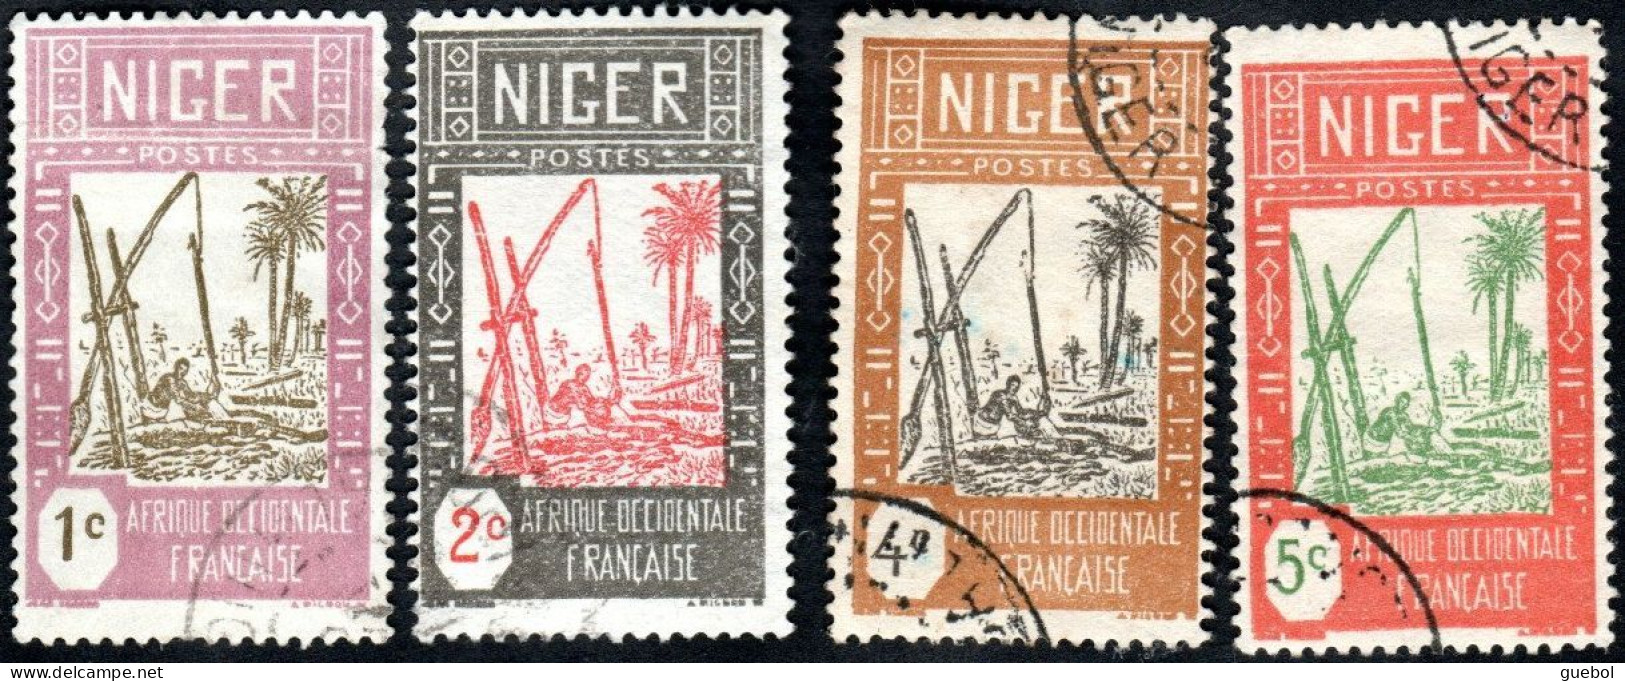 Niger Obl. N° 29 - 30 - 31 - 32 - Puits - Used Stamps